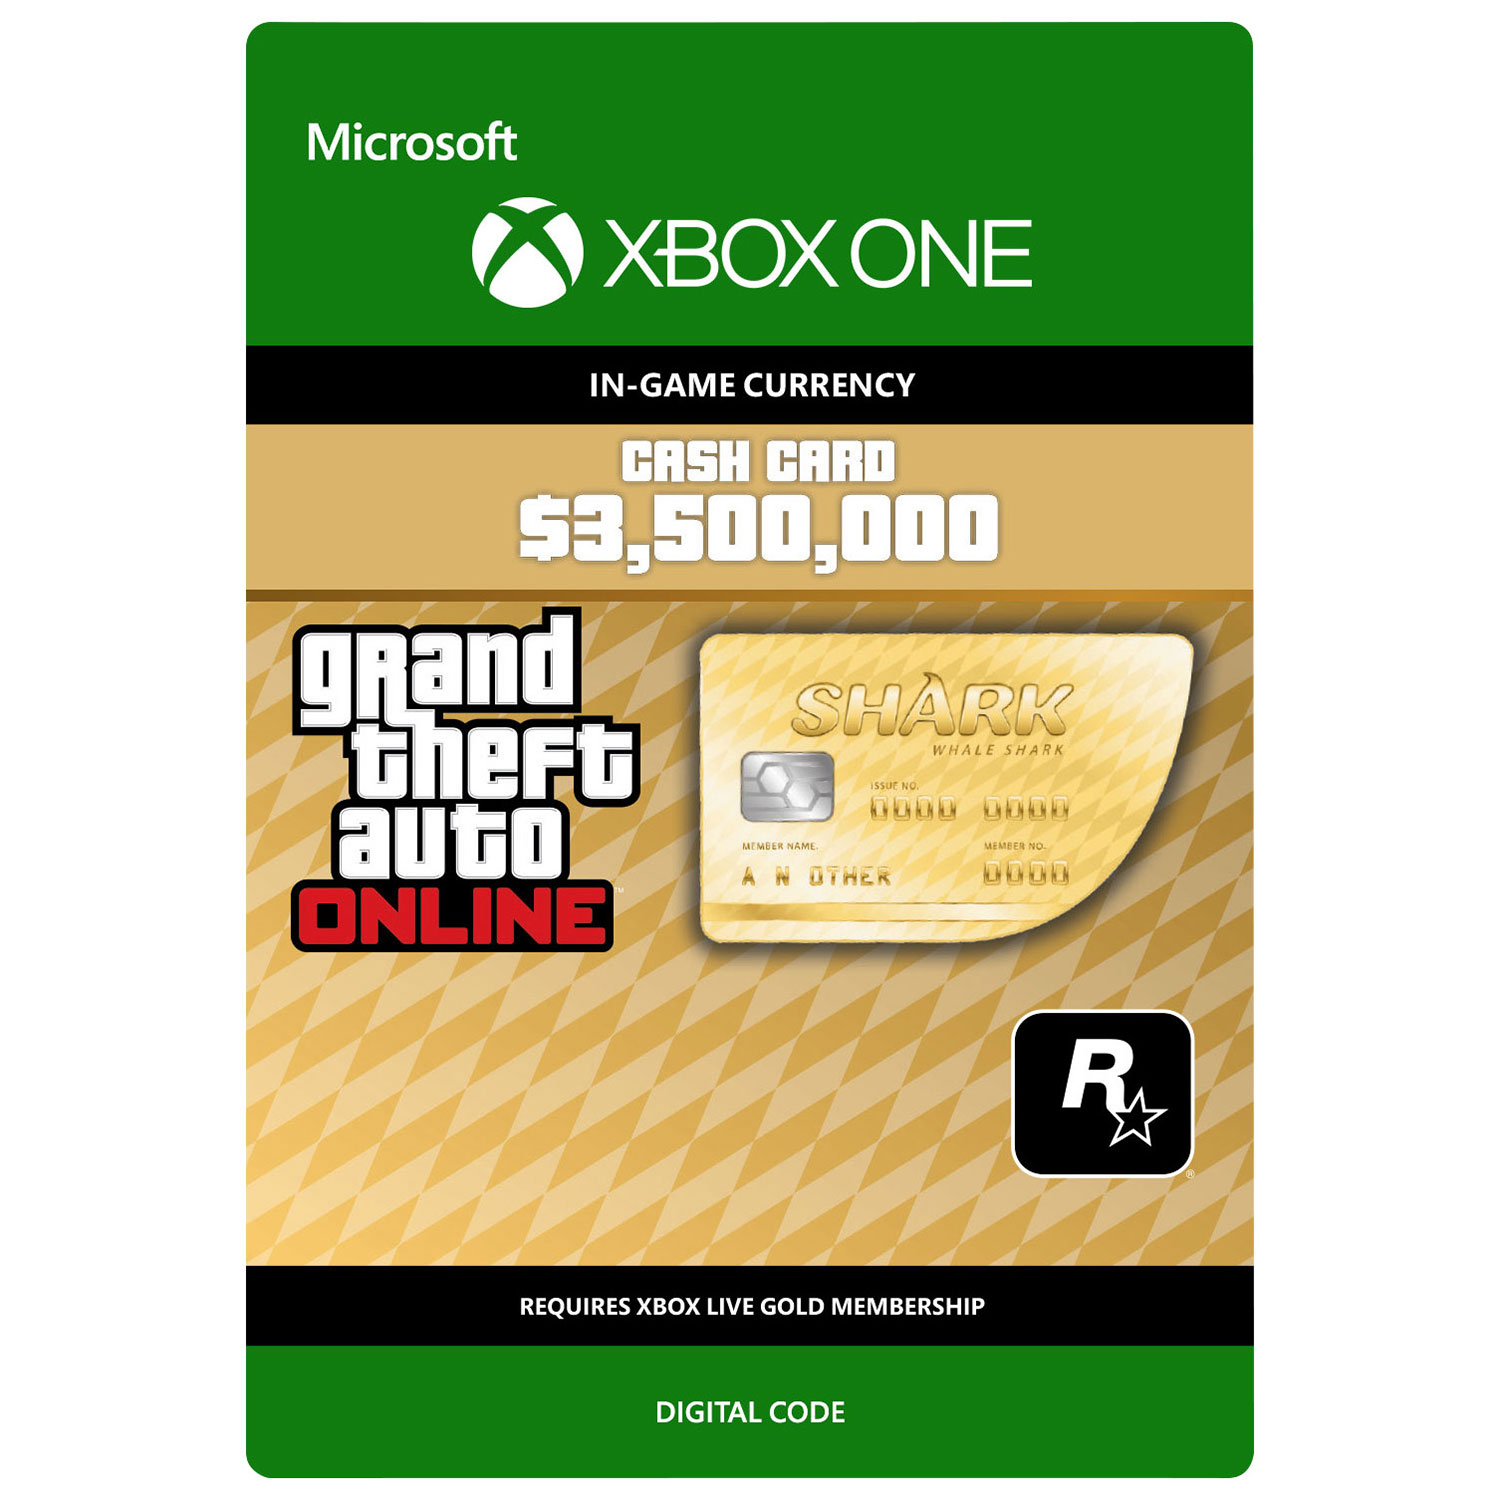 xbox-grand-theft-auto-3-where-to-buy-it-at-the-best-price-in-canada